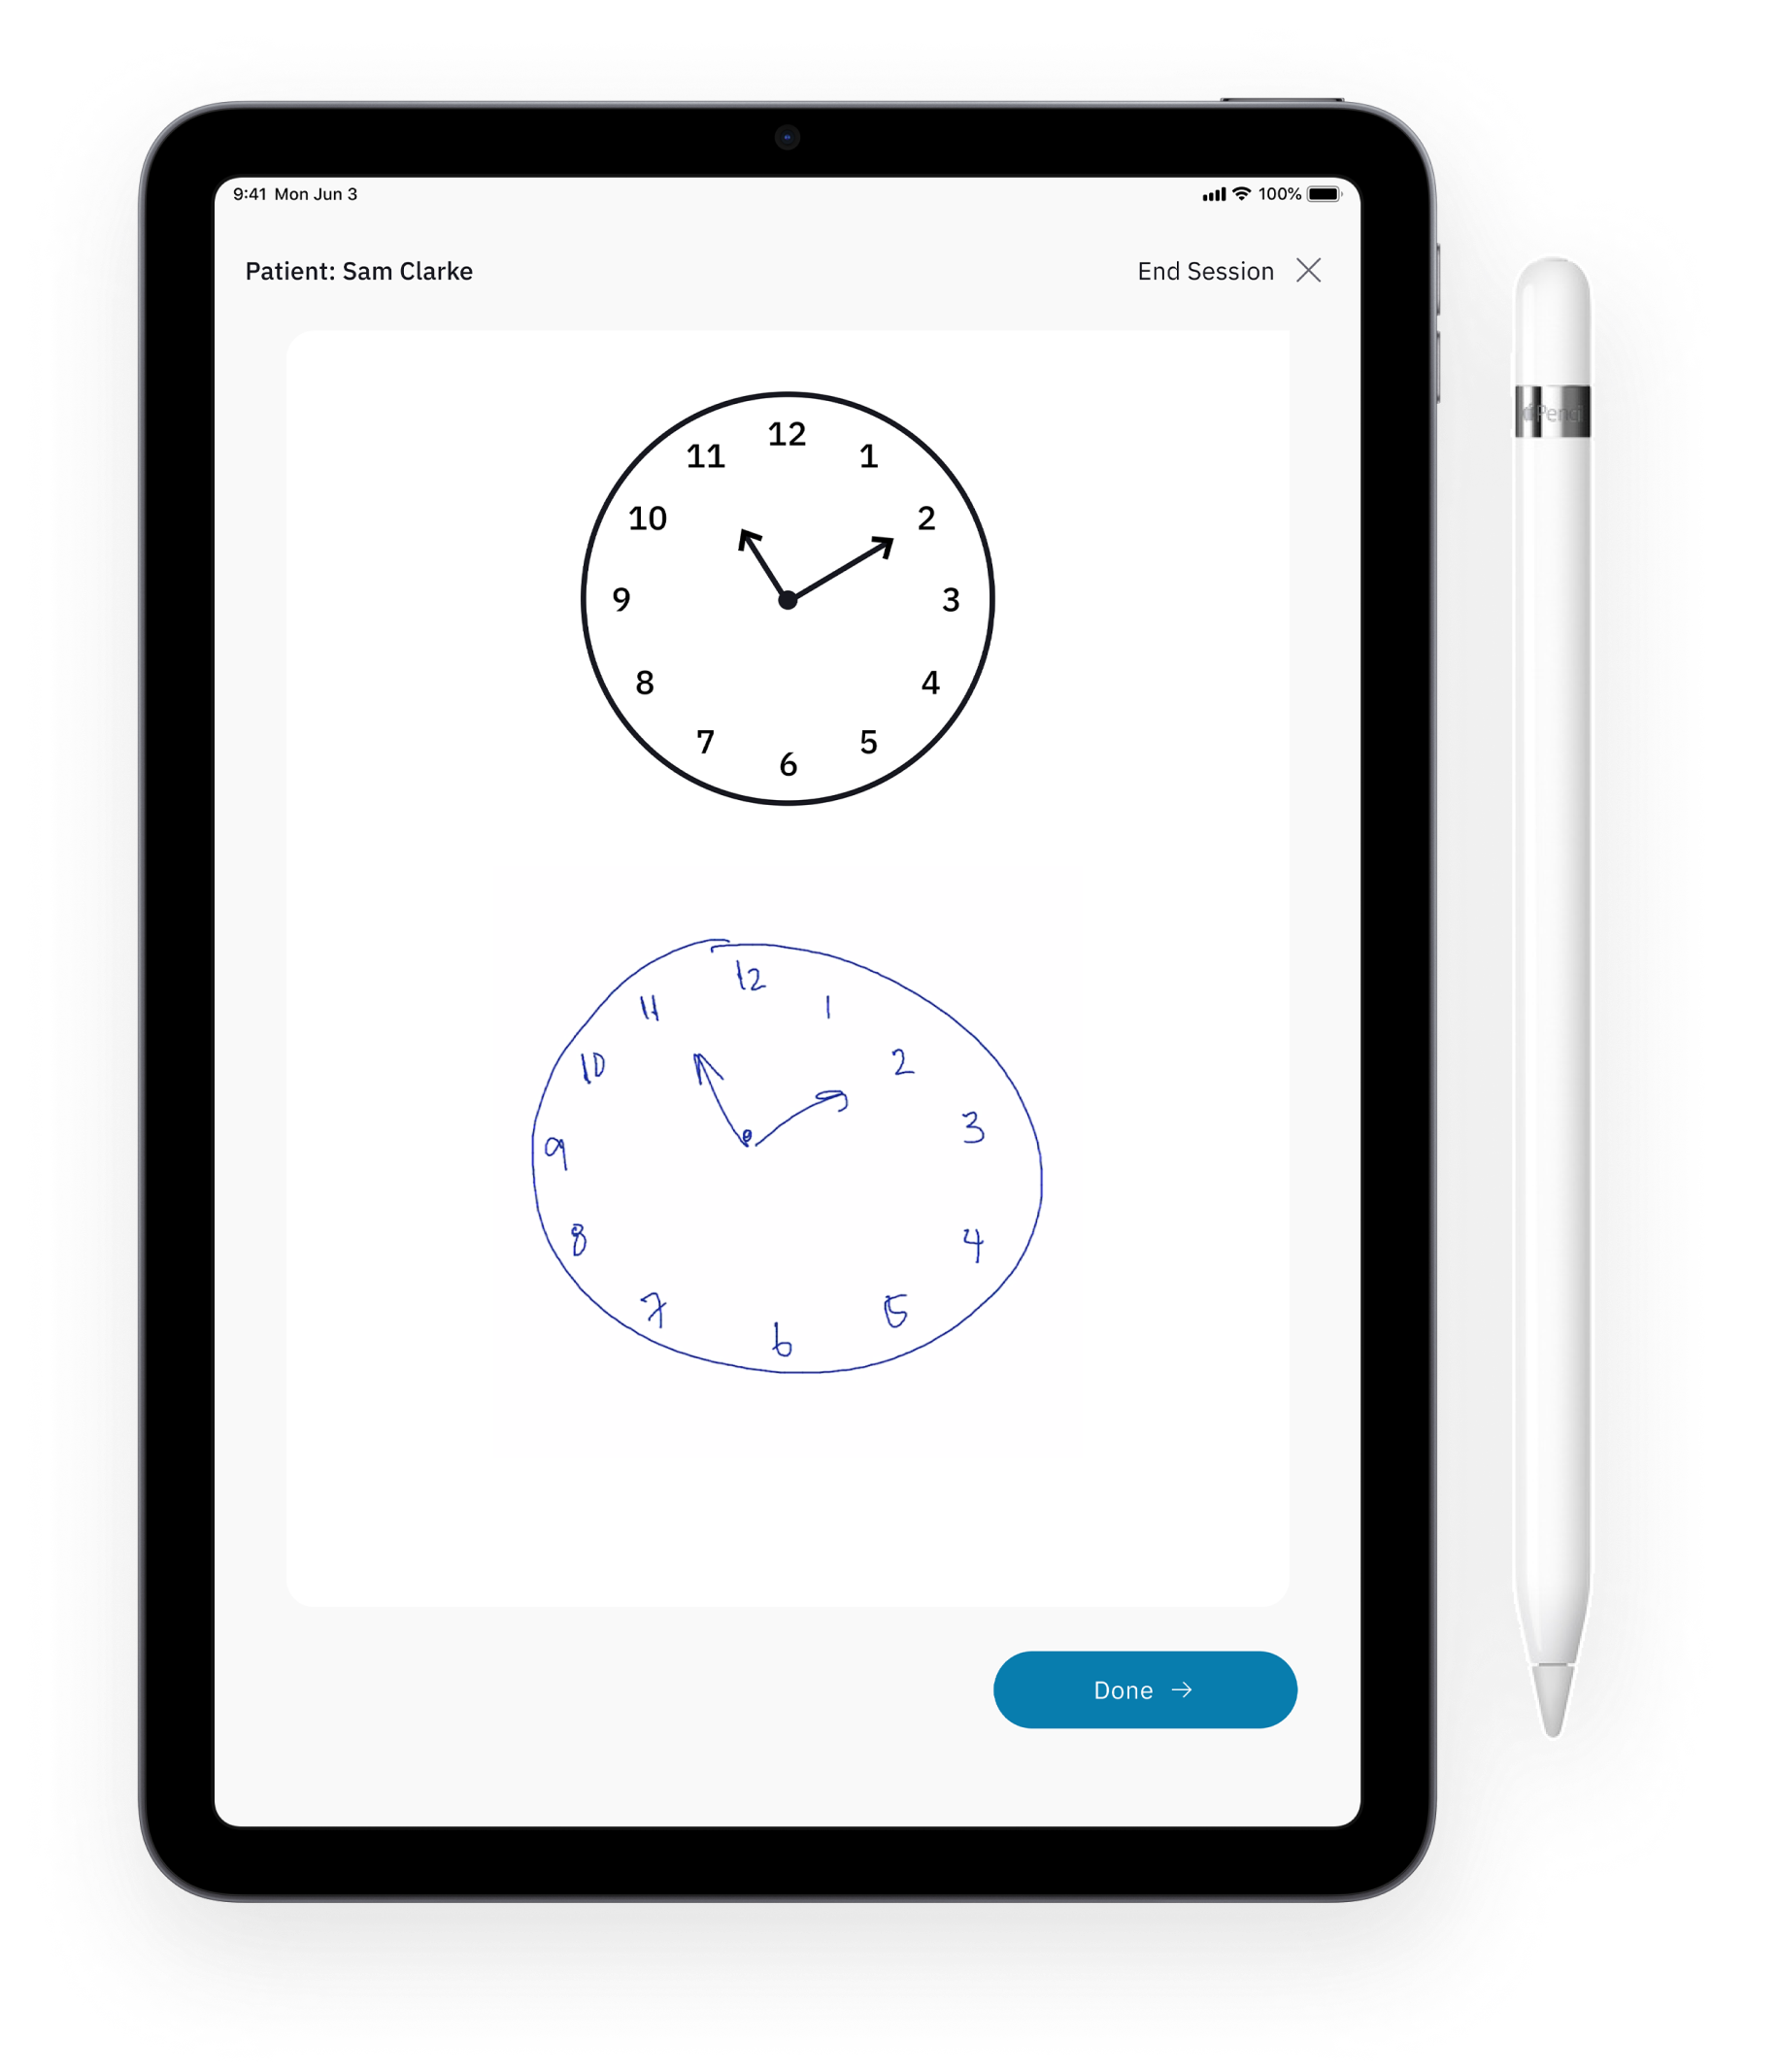 iPad showing the digital clock drawing test for Alzheimers and other dementias. This advanced cognitive test builds upon the scientifically validated traditional cognitive test but combining the clock drawing test with word recall tasks. This cognitive impairment test platform integrates with modern EHR systems and can detect early signs of Alzheimer's and other dementias